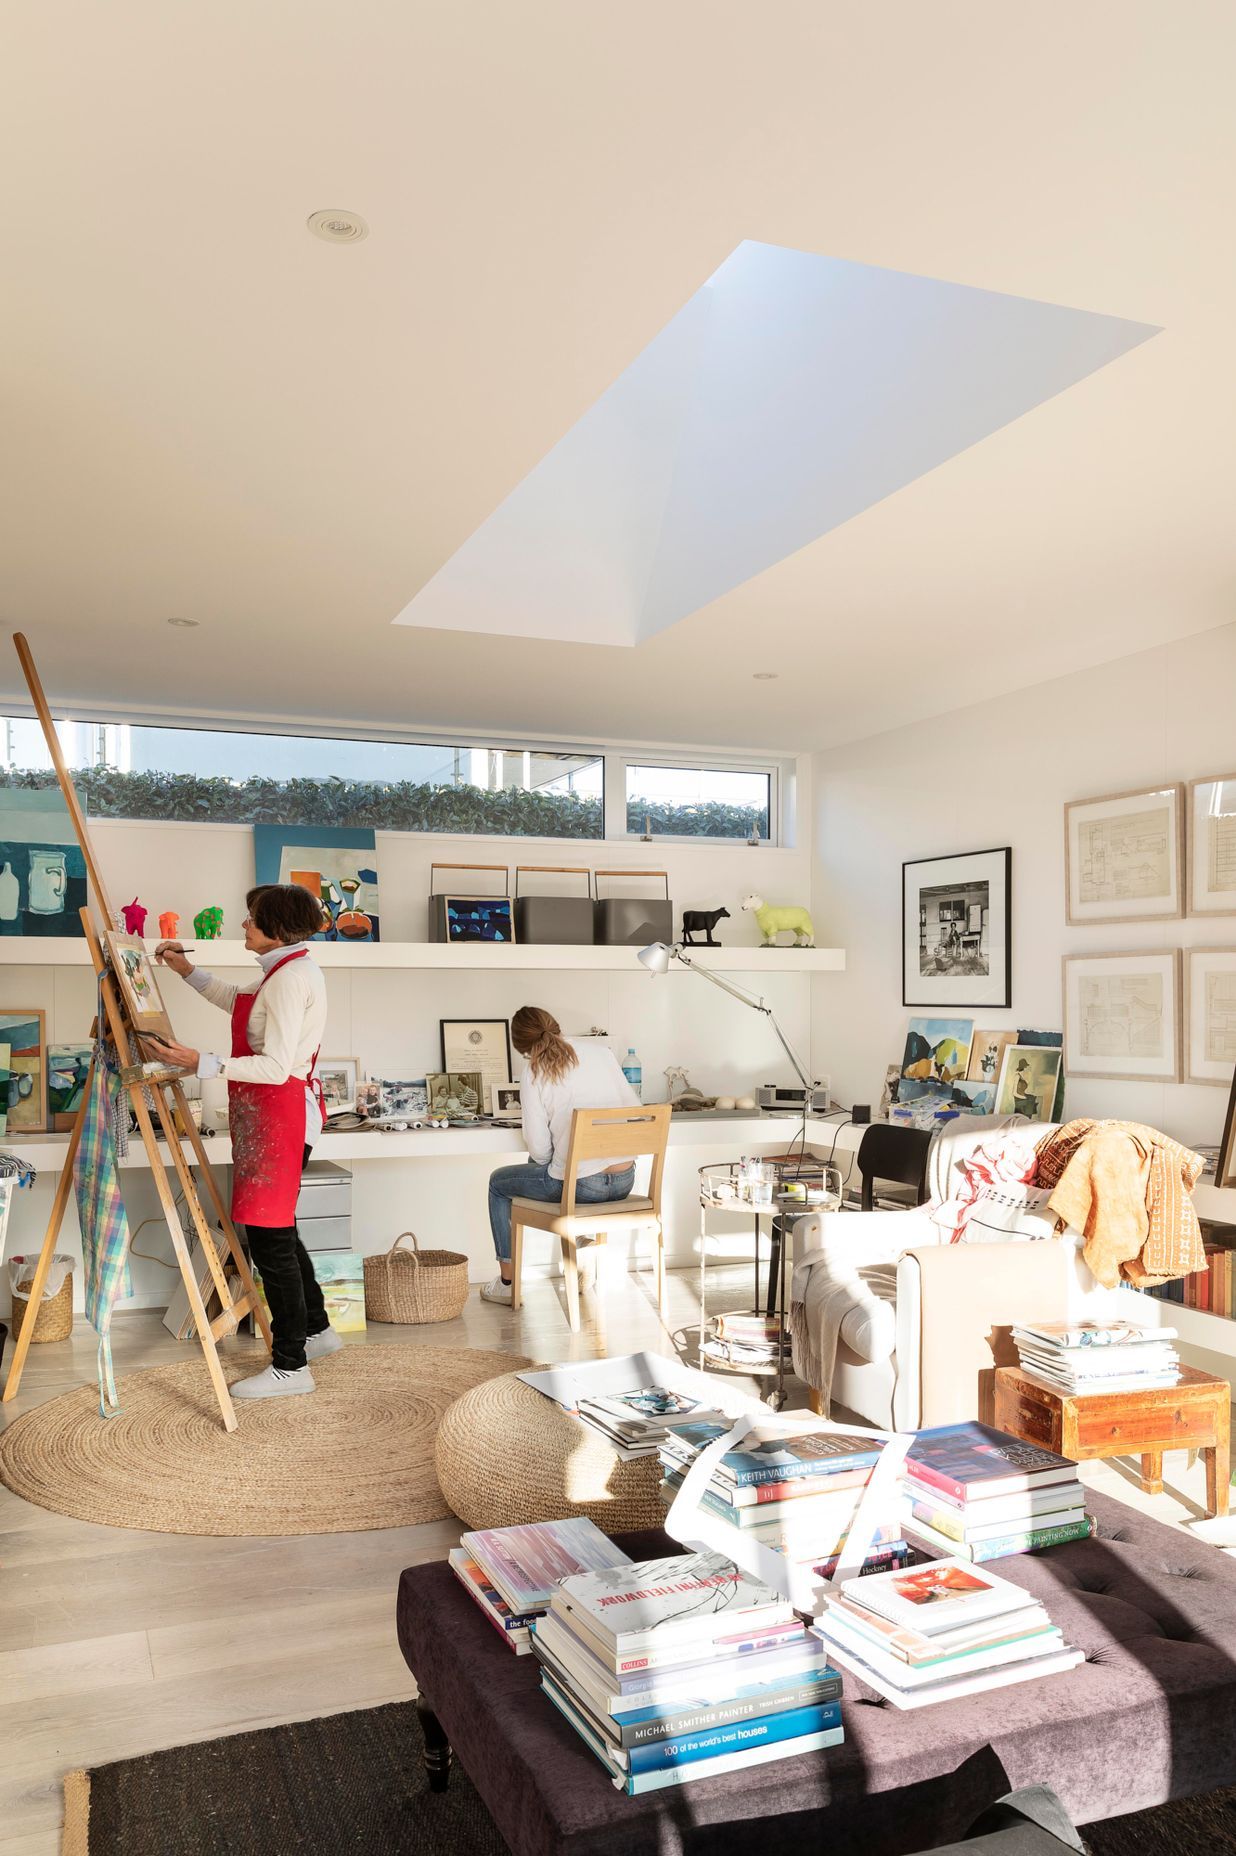 Jane painting in her studio, with her daughter working alongside.